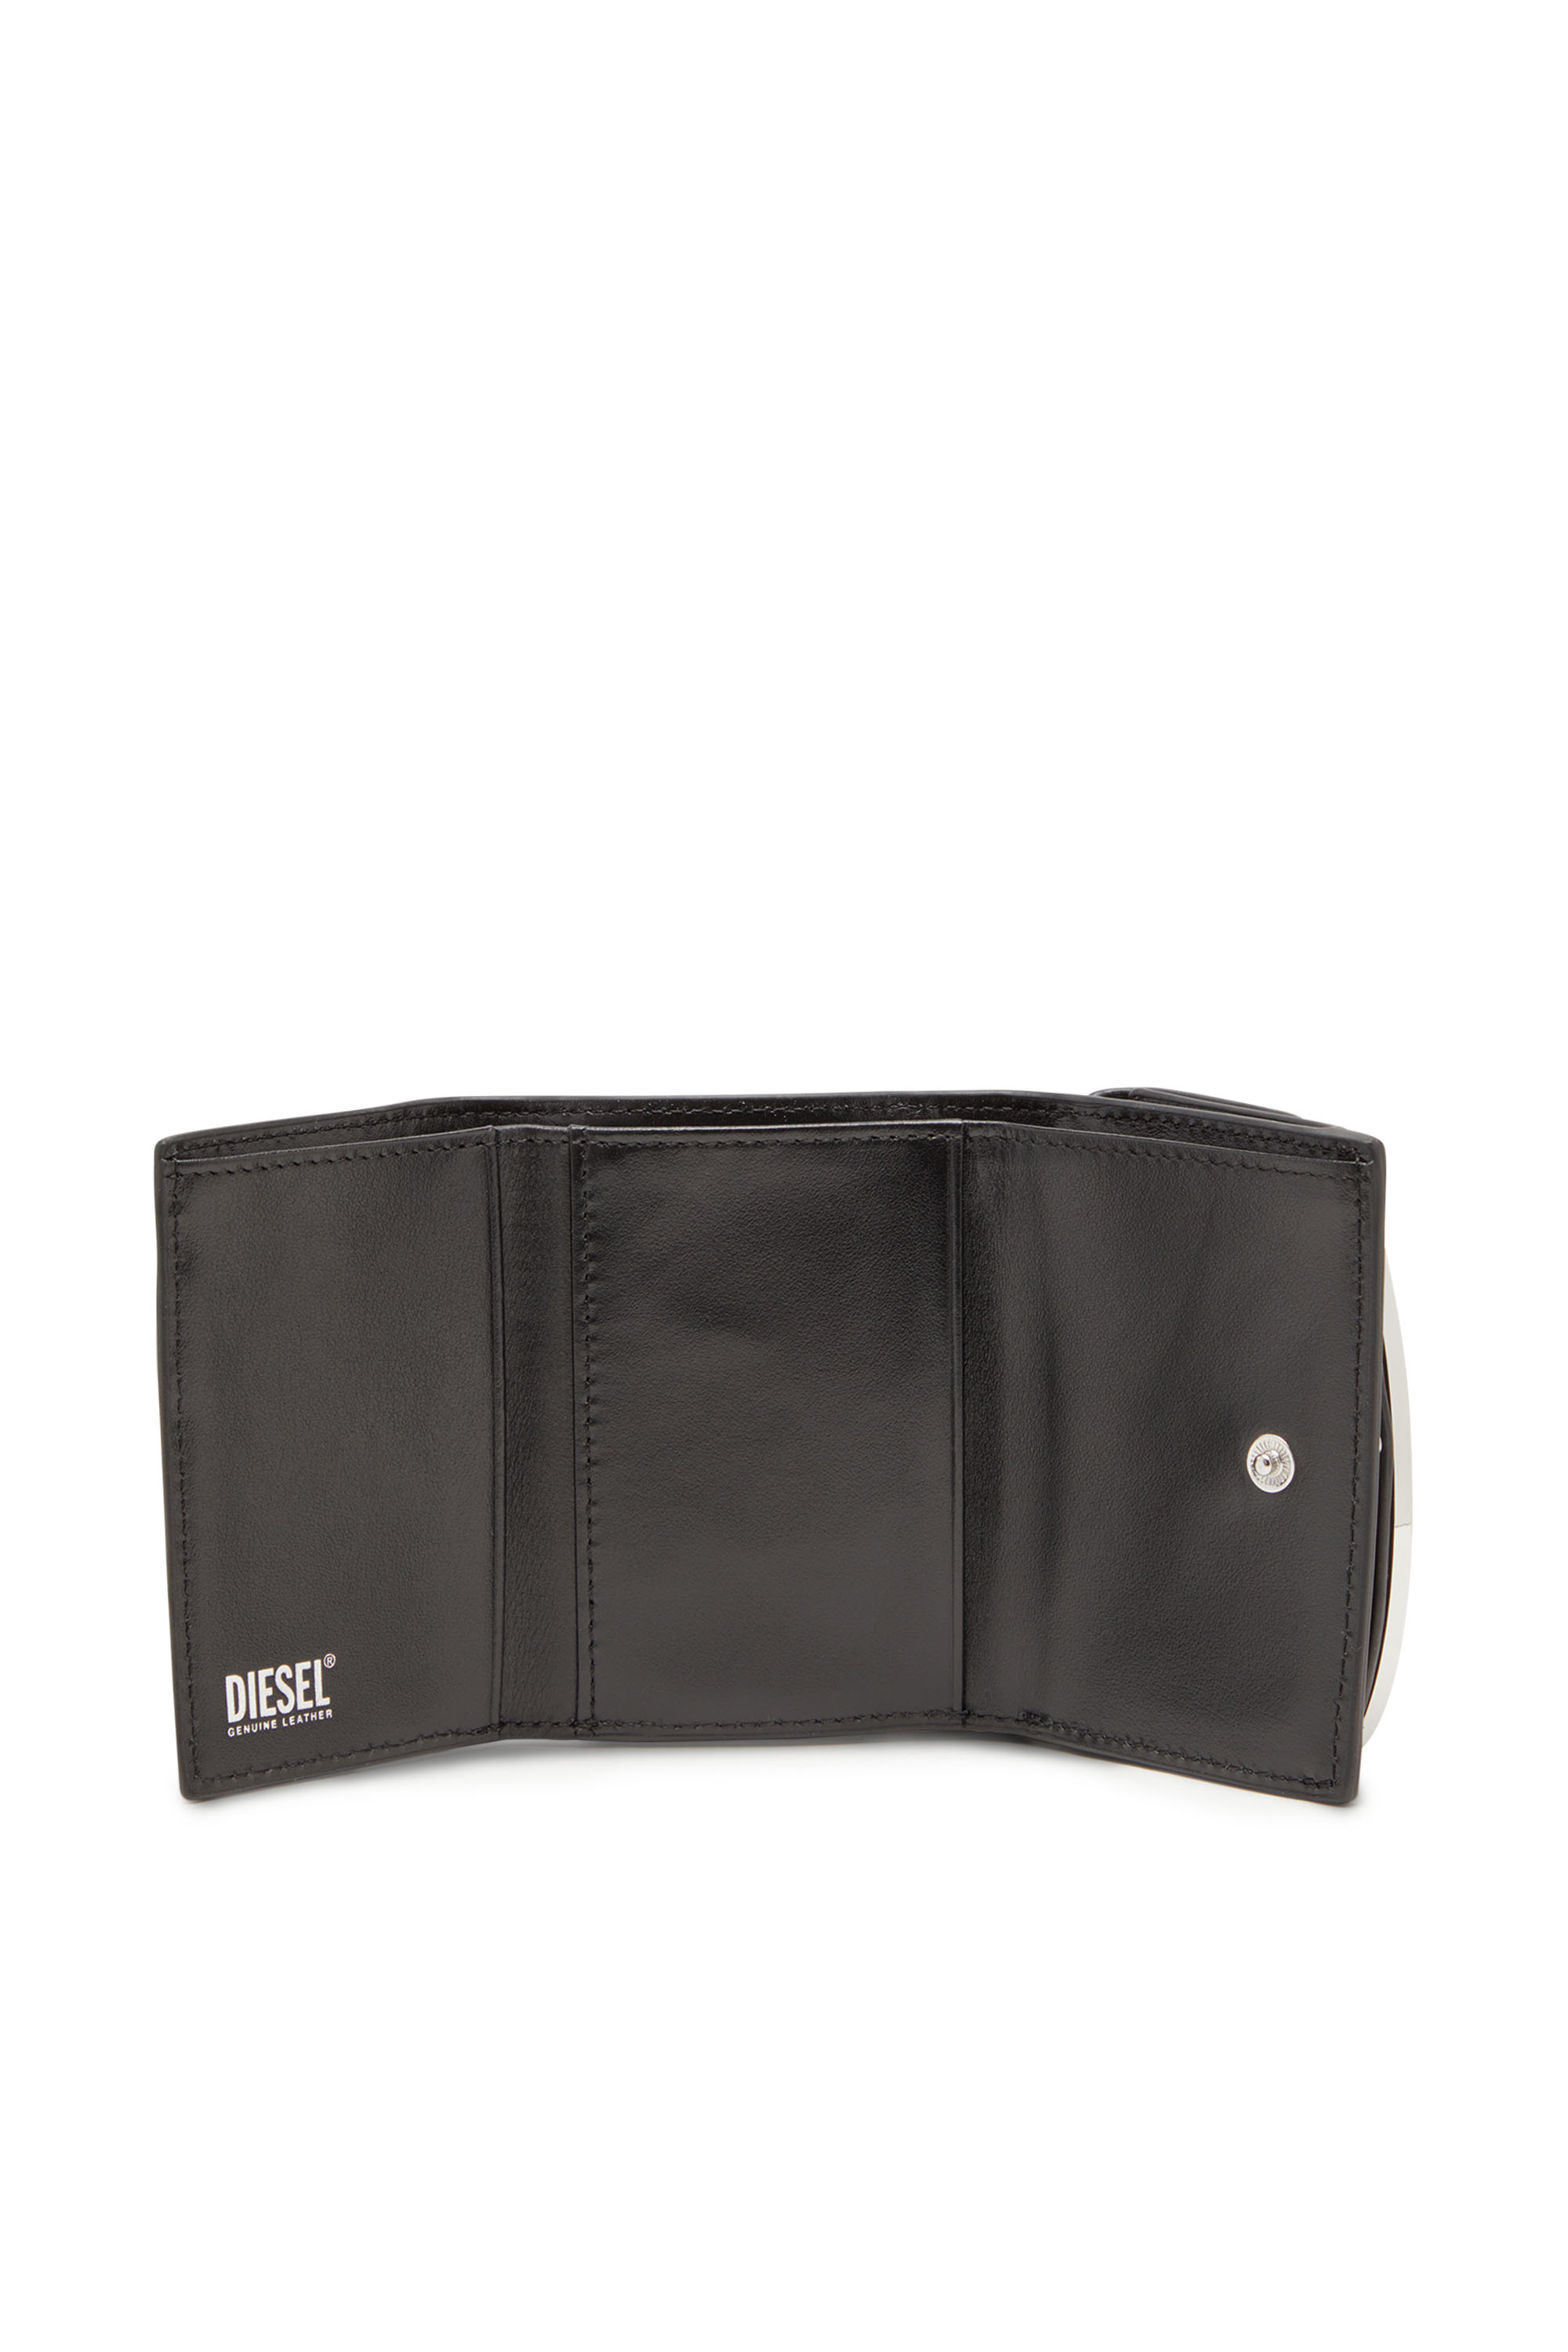 Diesel - 1DR TRI FOLD COIN XS II, Female Tri-fold wallet in leather in ブラック - Image 3